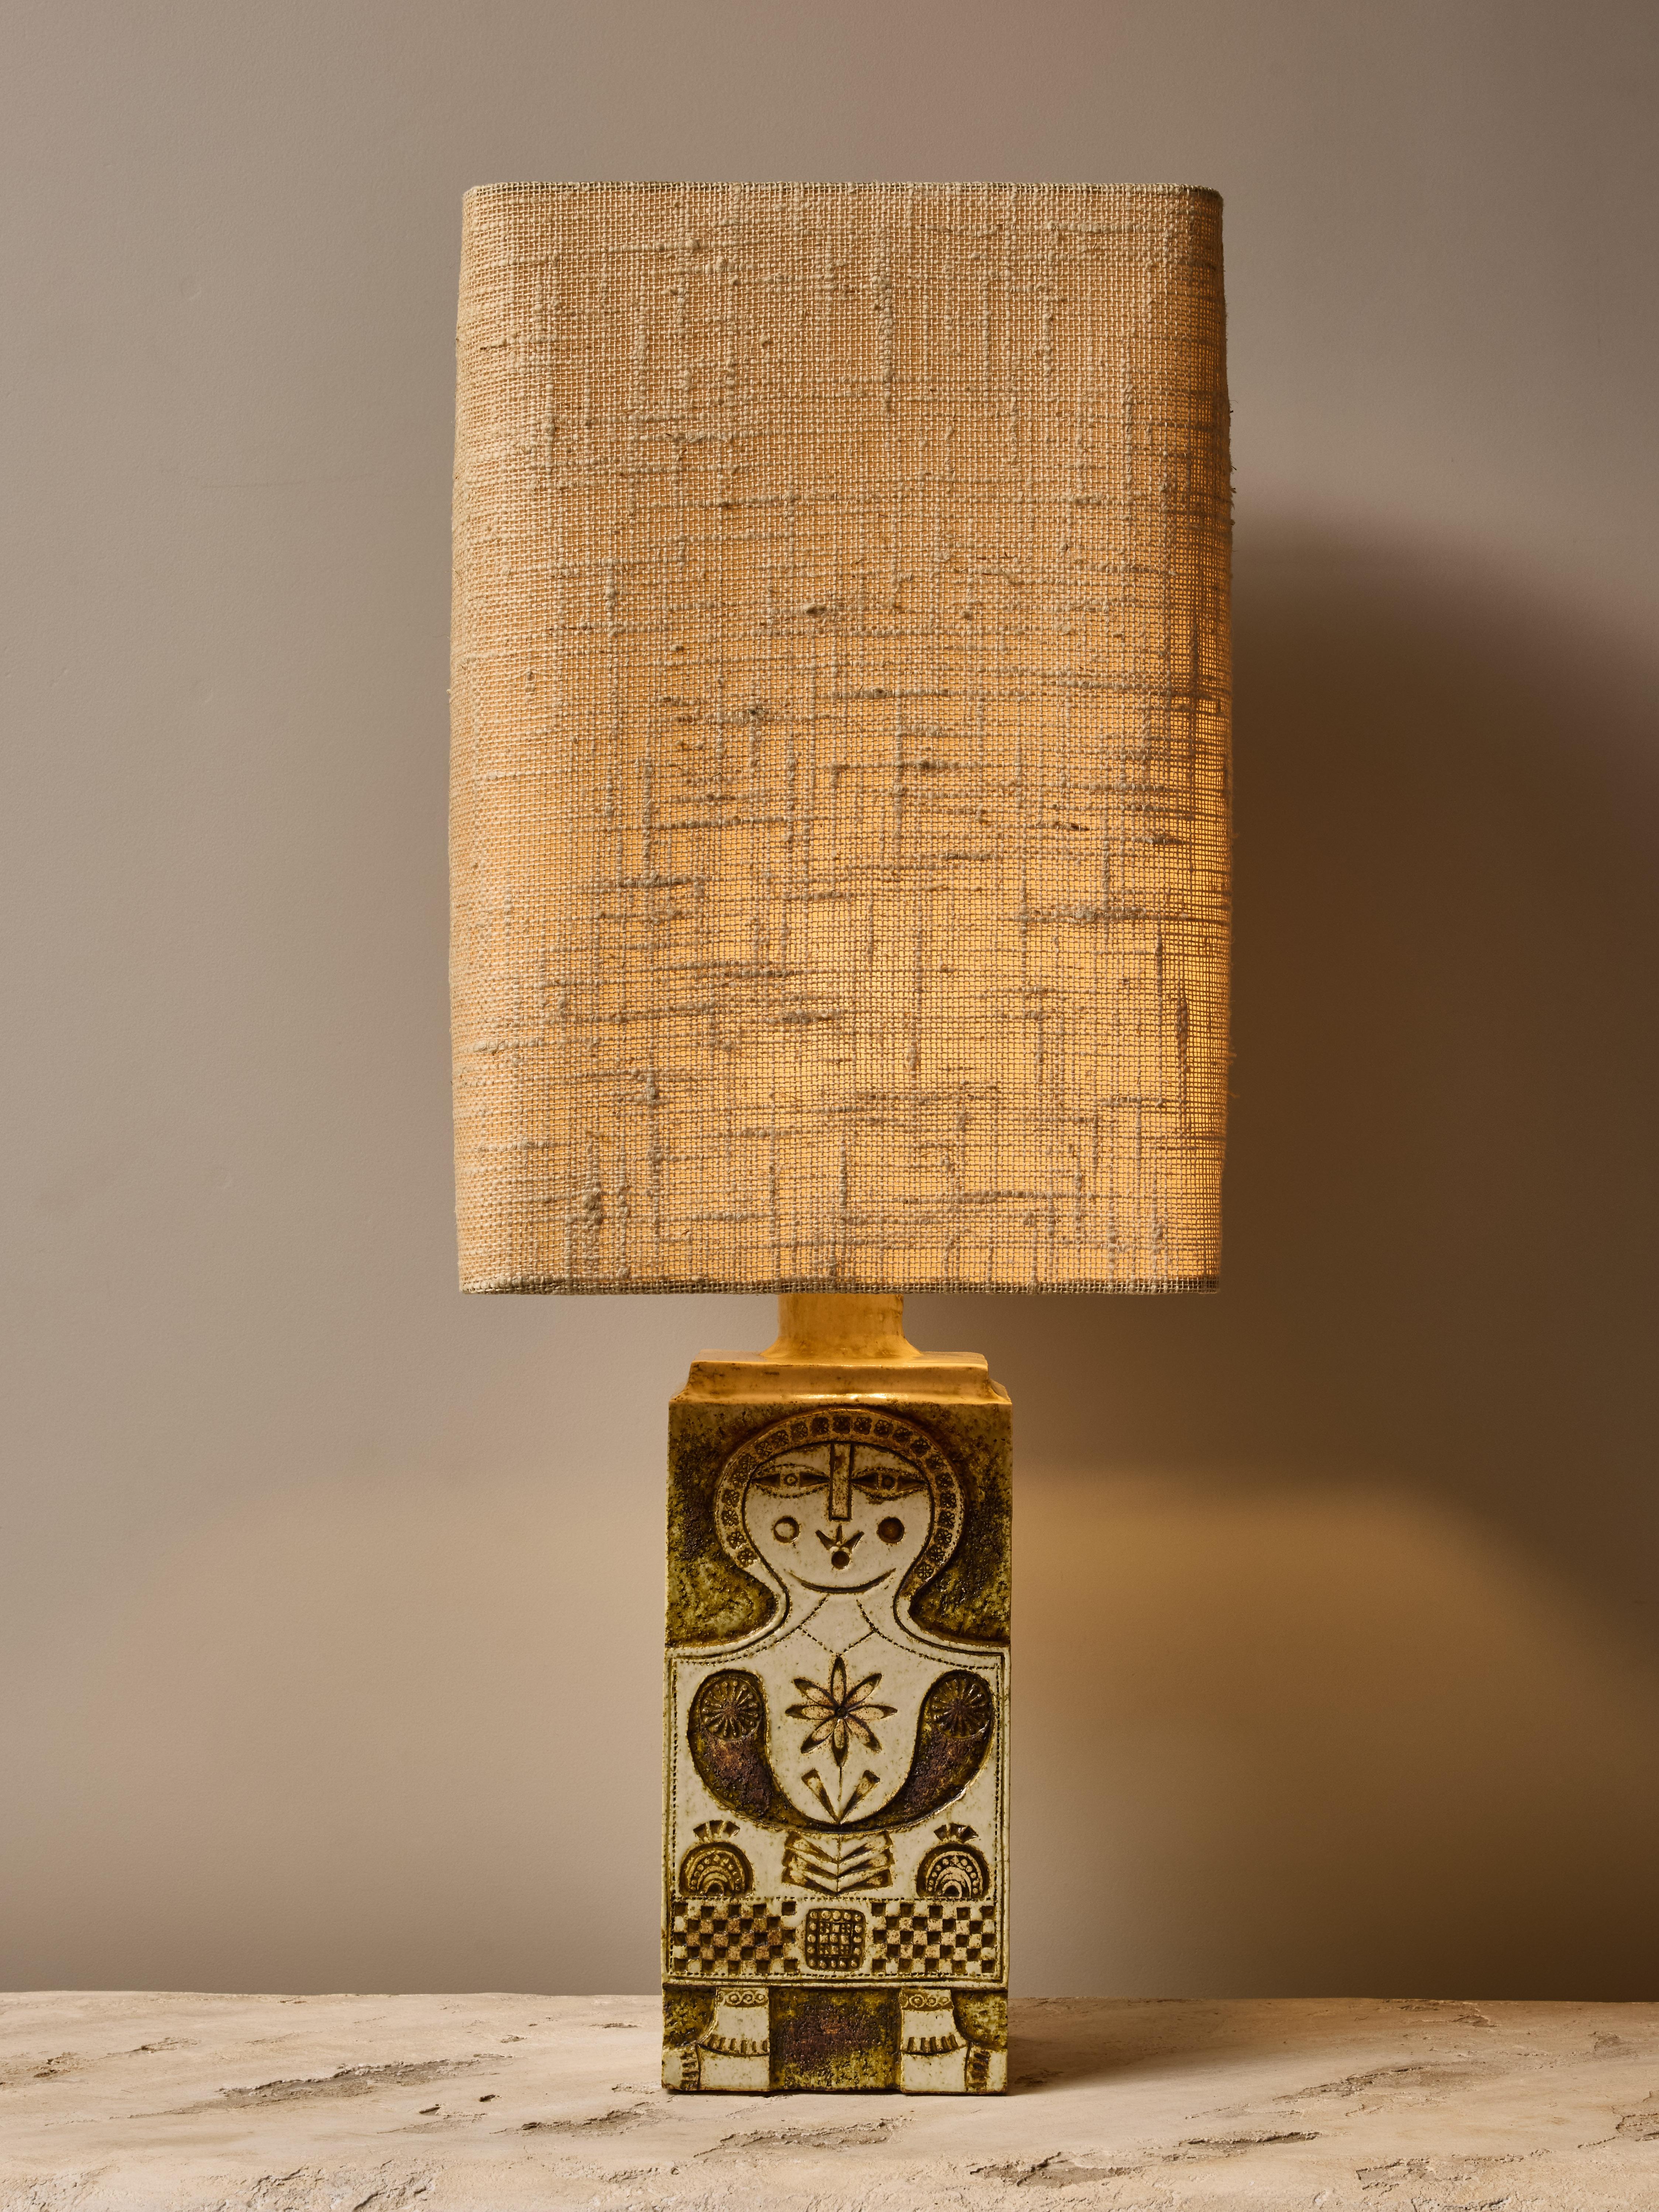 Stunning table lamp made by Roger Capron, made of a square base with a character decor on the front face.

 Artist’s stamp on the bottom back of the lamp “Capron Valloris France”.
Topped with its original vintage lampshade.

Dimensions with